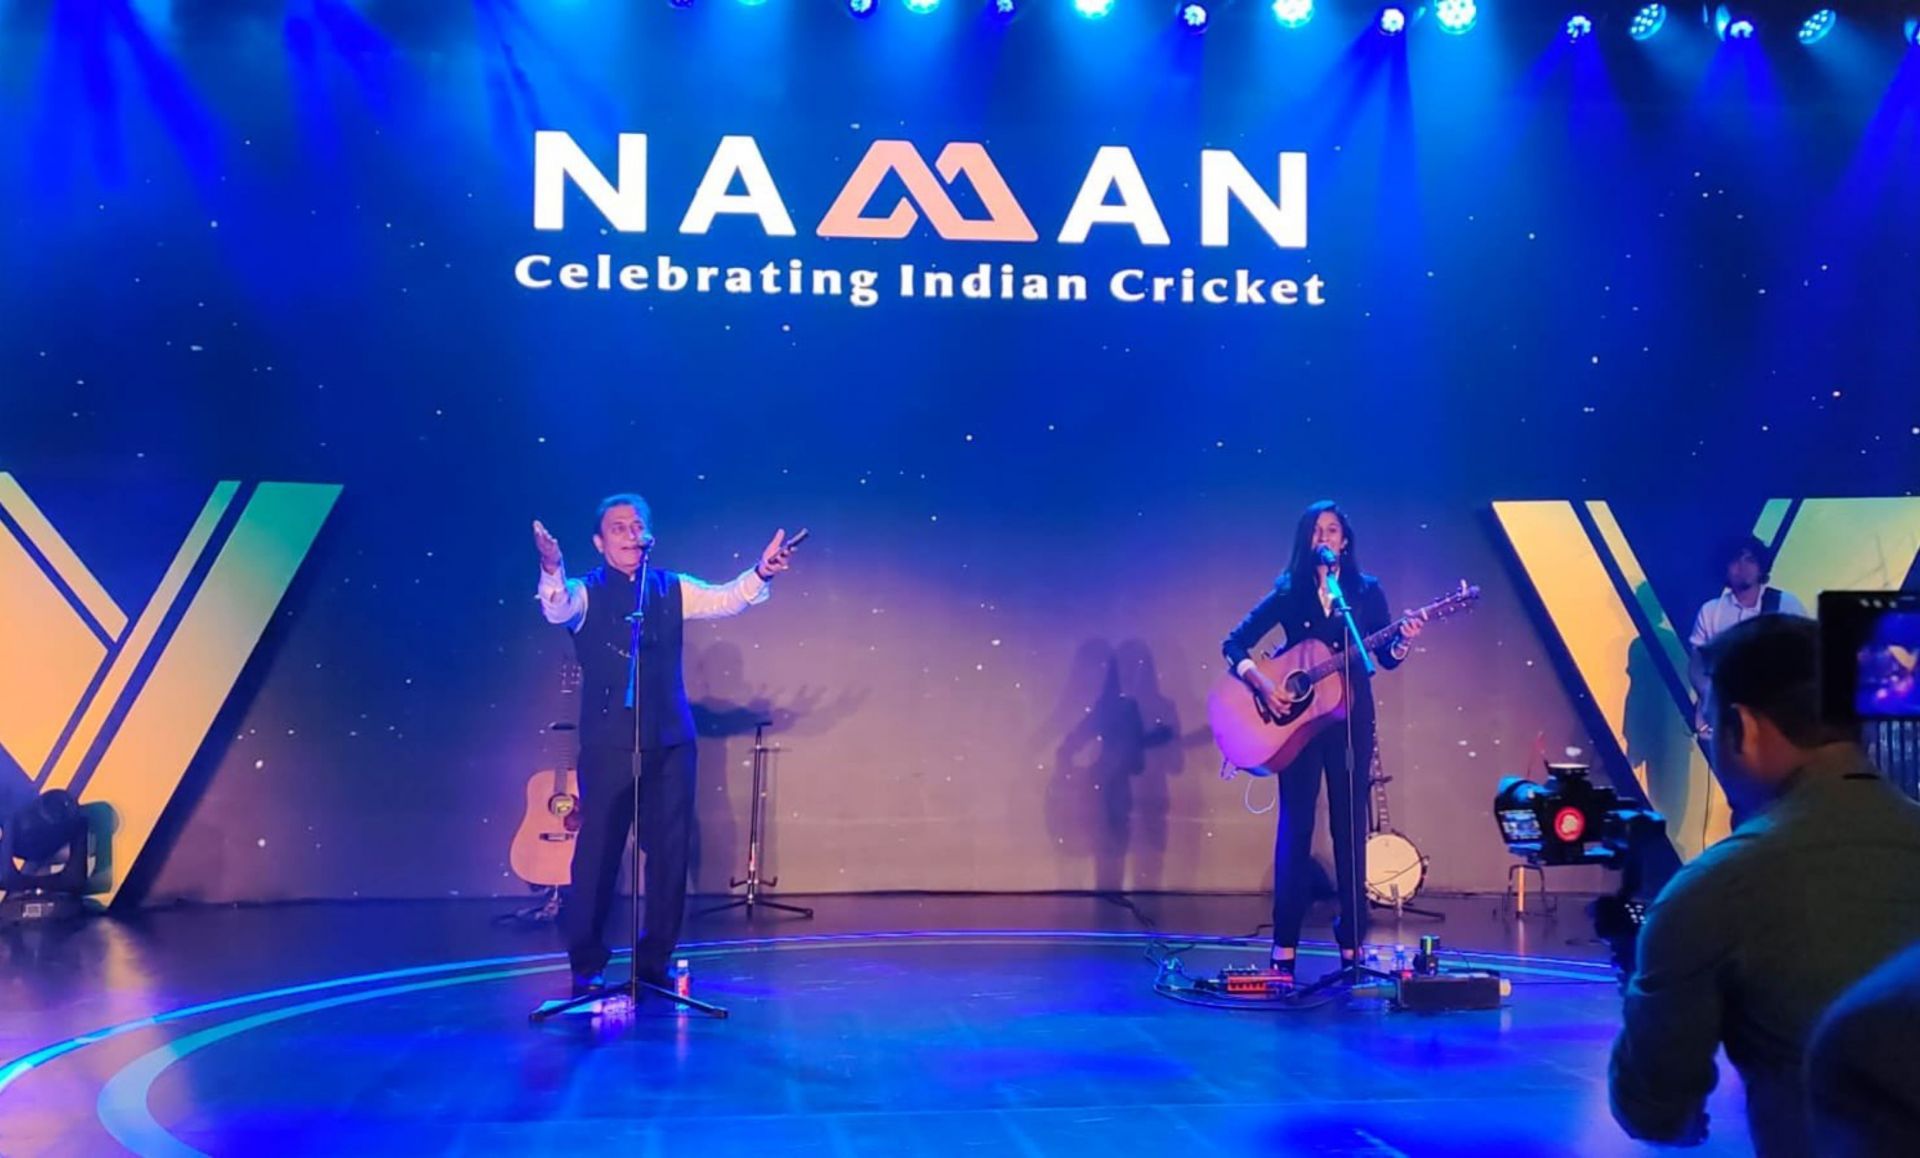 Sunil Gavaskar and Jemimah Rodrigues on the stage singing a song. 